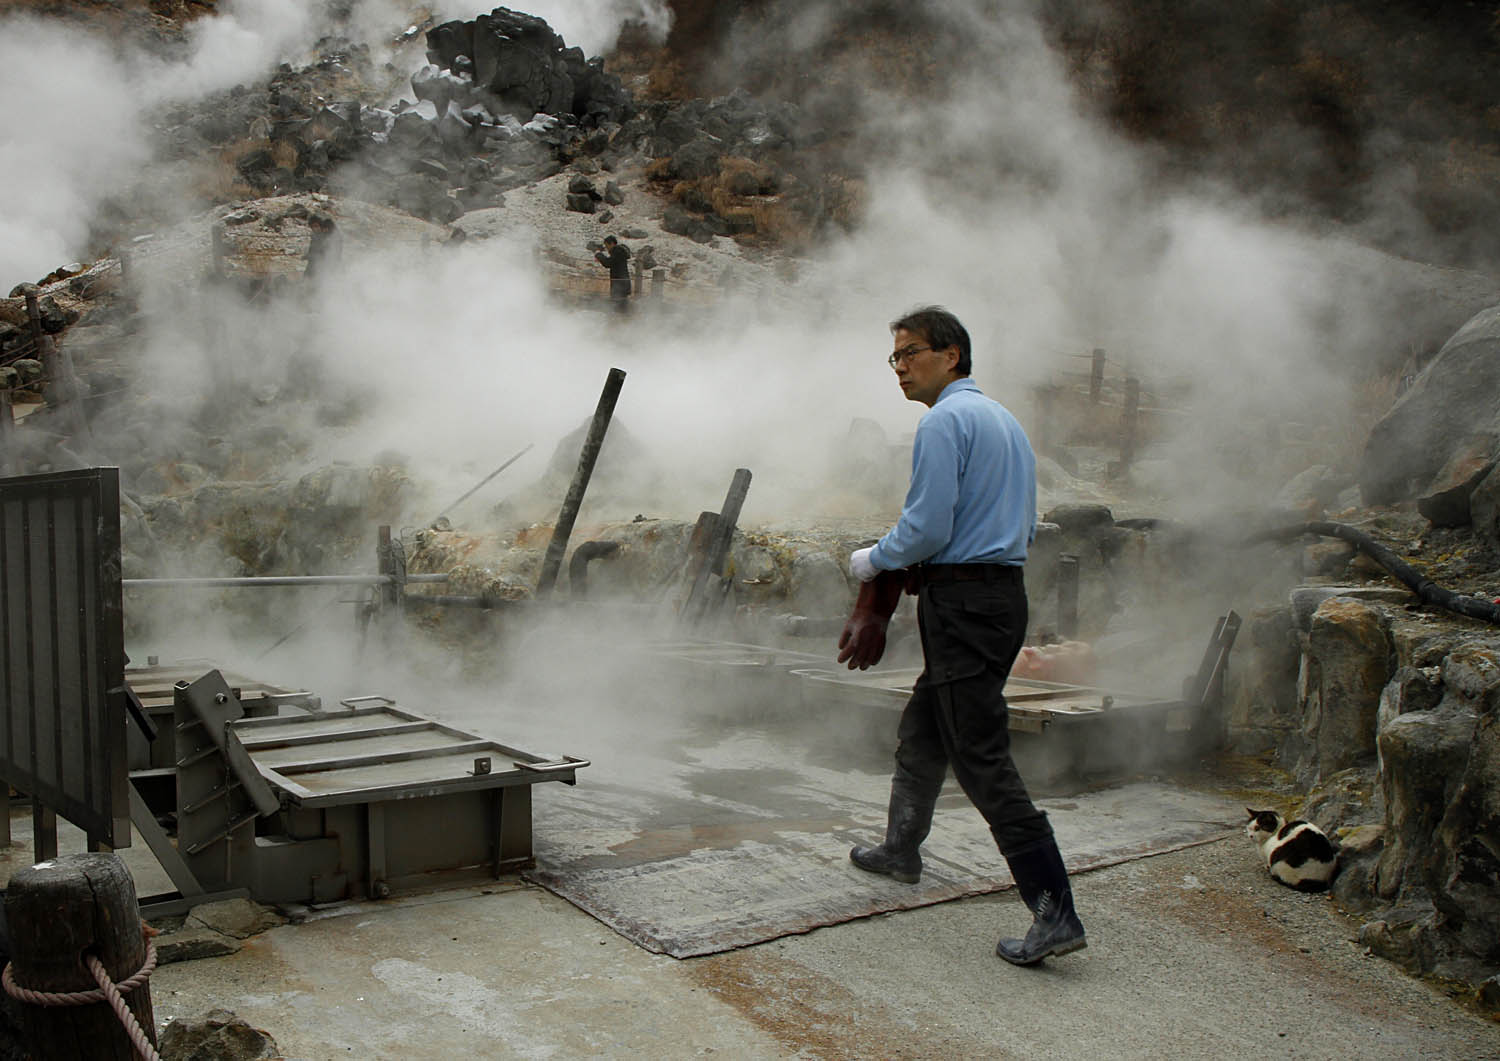  Steam surrounds a worker in Hakone, Japan, as he prepares to extract 黒玉子, or black eggs, from the sulfurous water of a mountain hot spring. The eggs boiled in the water take on a black color from the sulfur. According to legend, eating one of these 